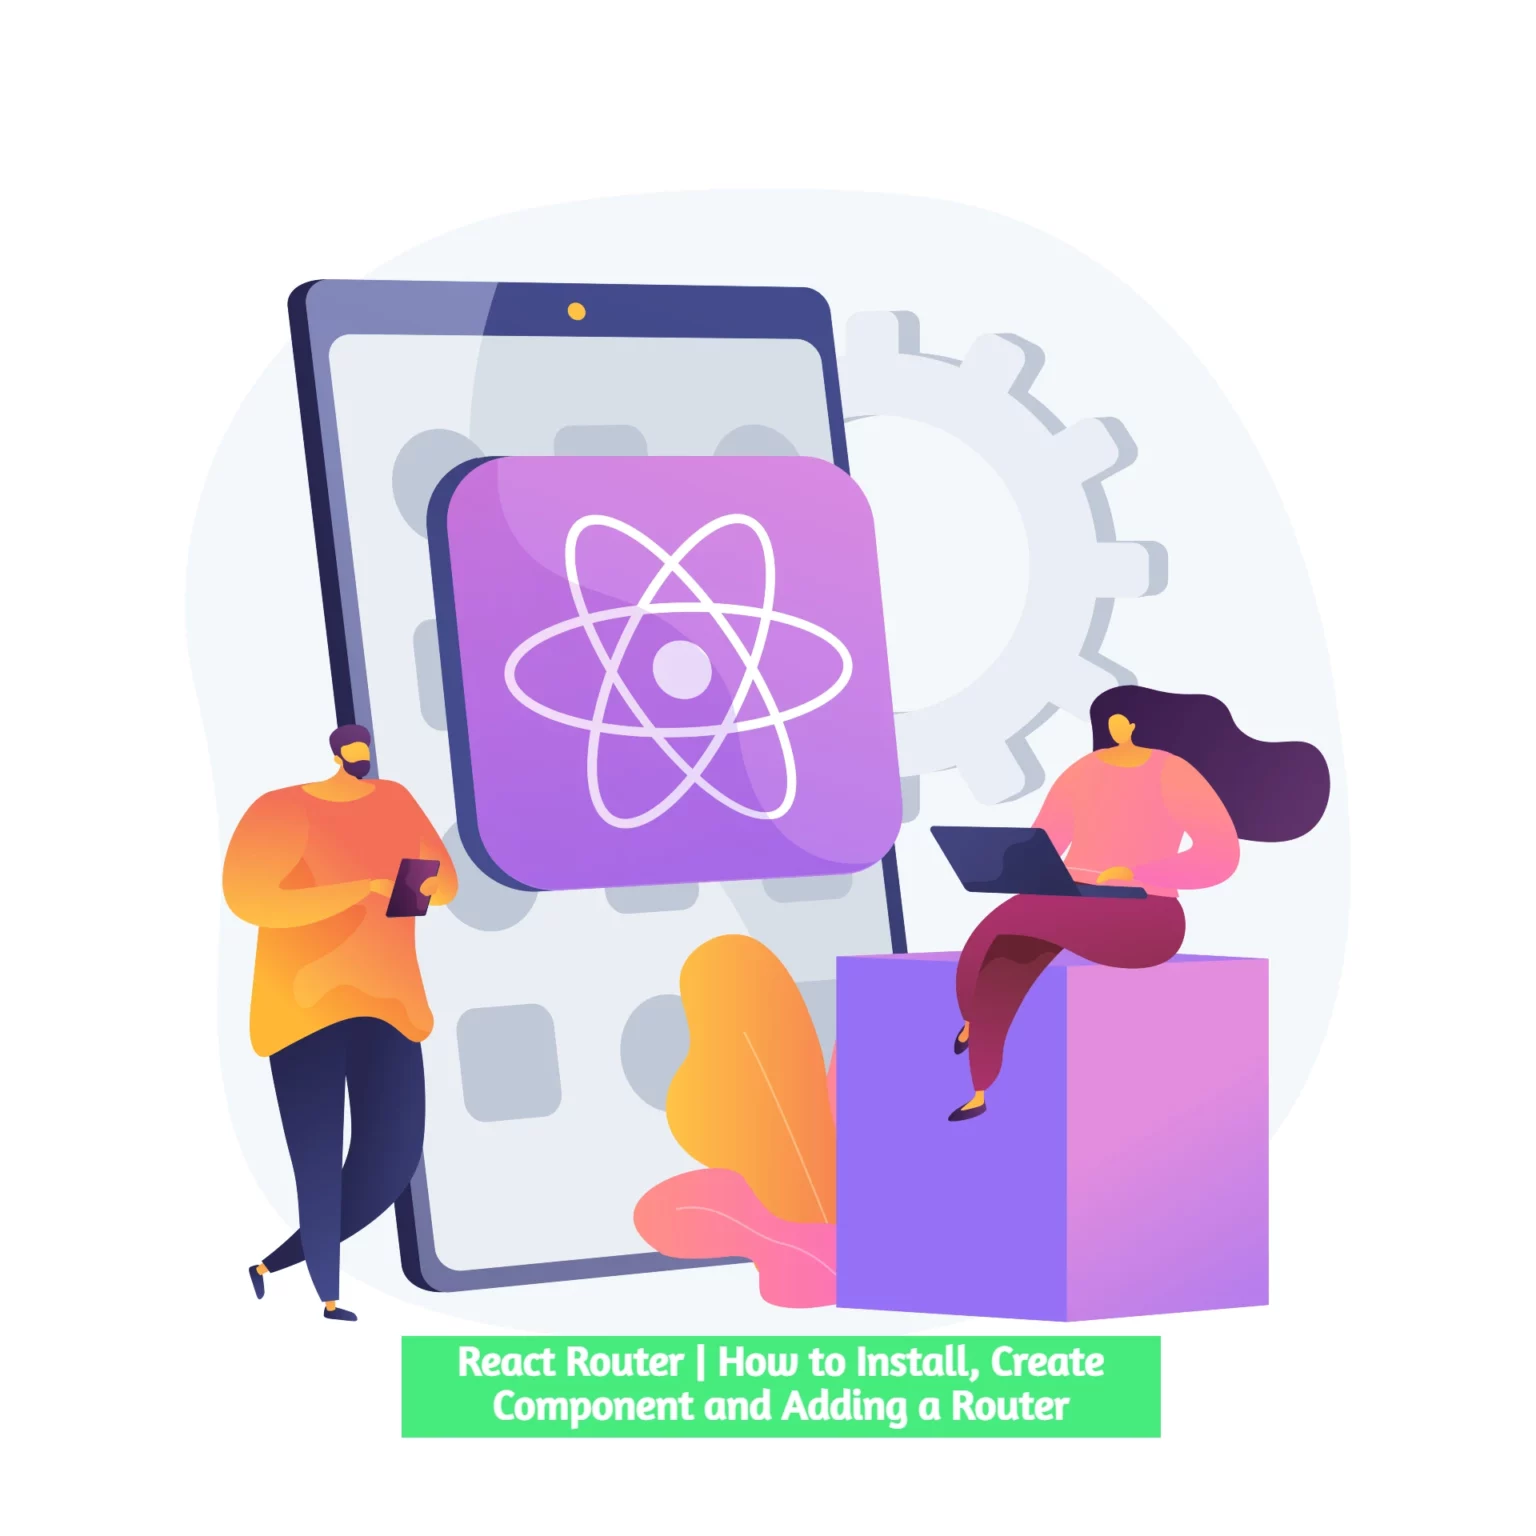 React Router | How to Install, Create Component and Adding a Router